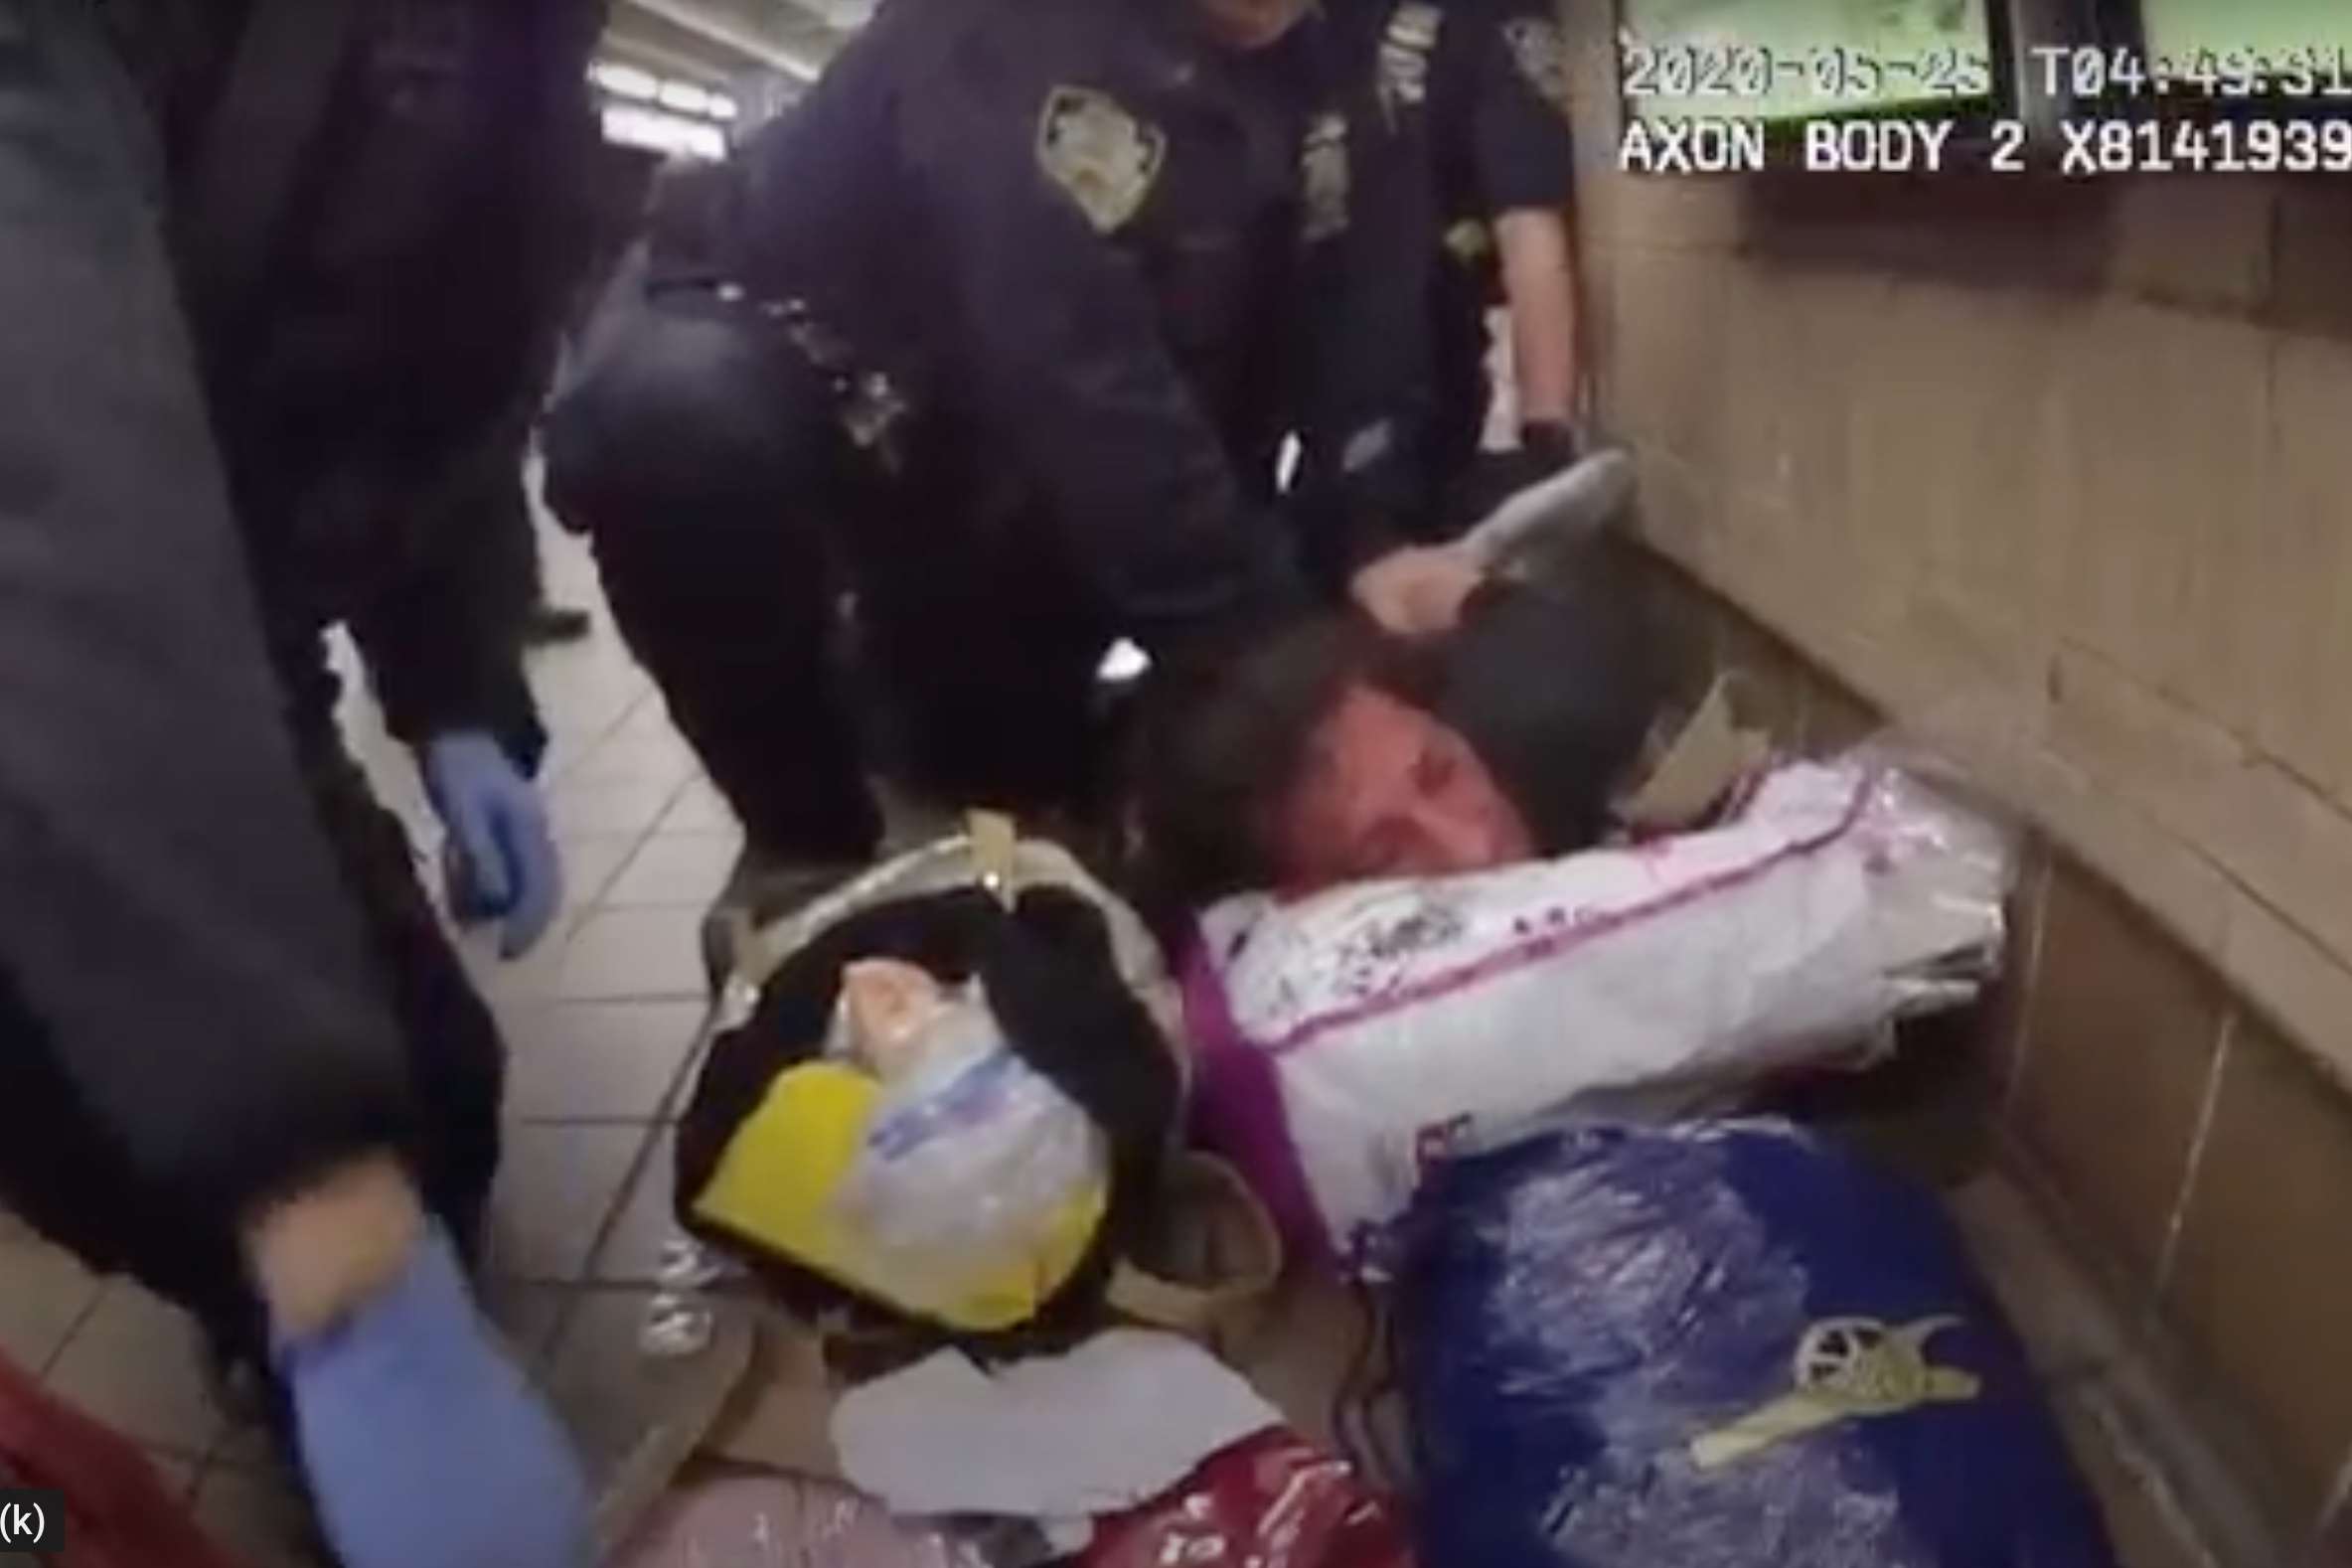 Joseph T. was hit and pepper sprayed by NYPD officers as they removed him from a 6 train at 51st Street in  May.